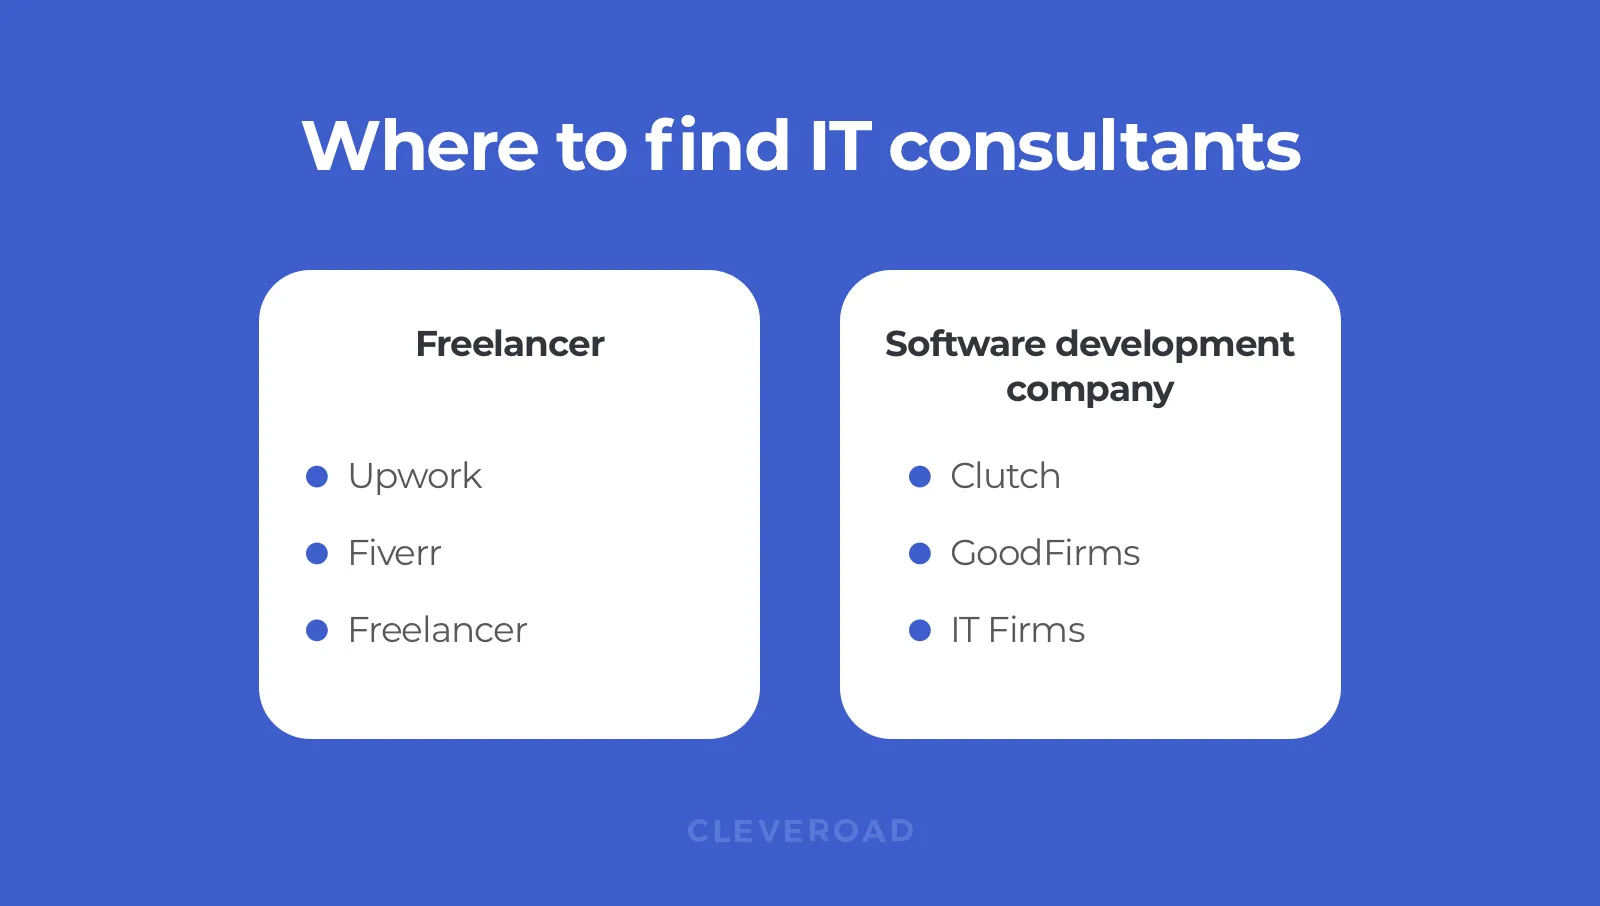 Where to find IT consultants